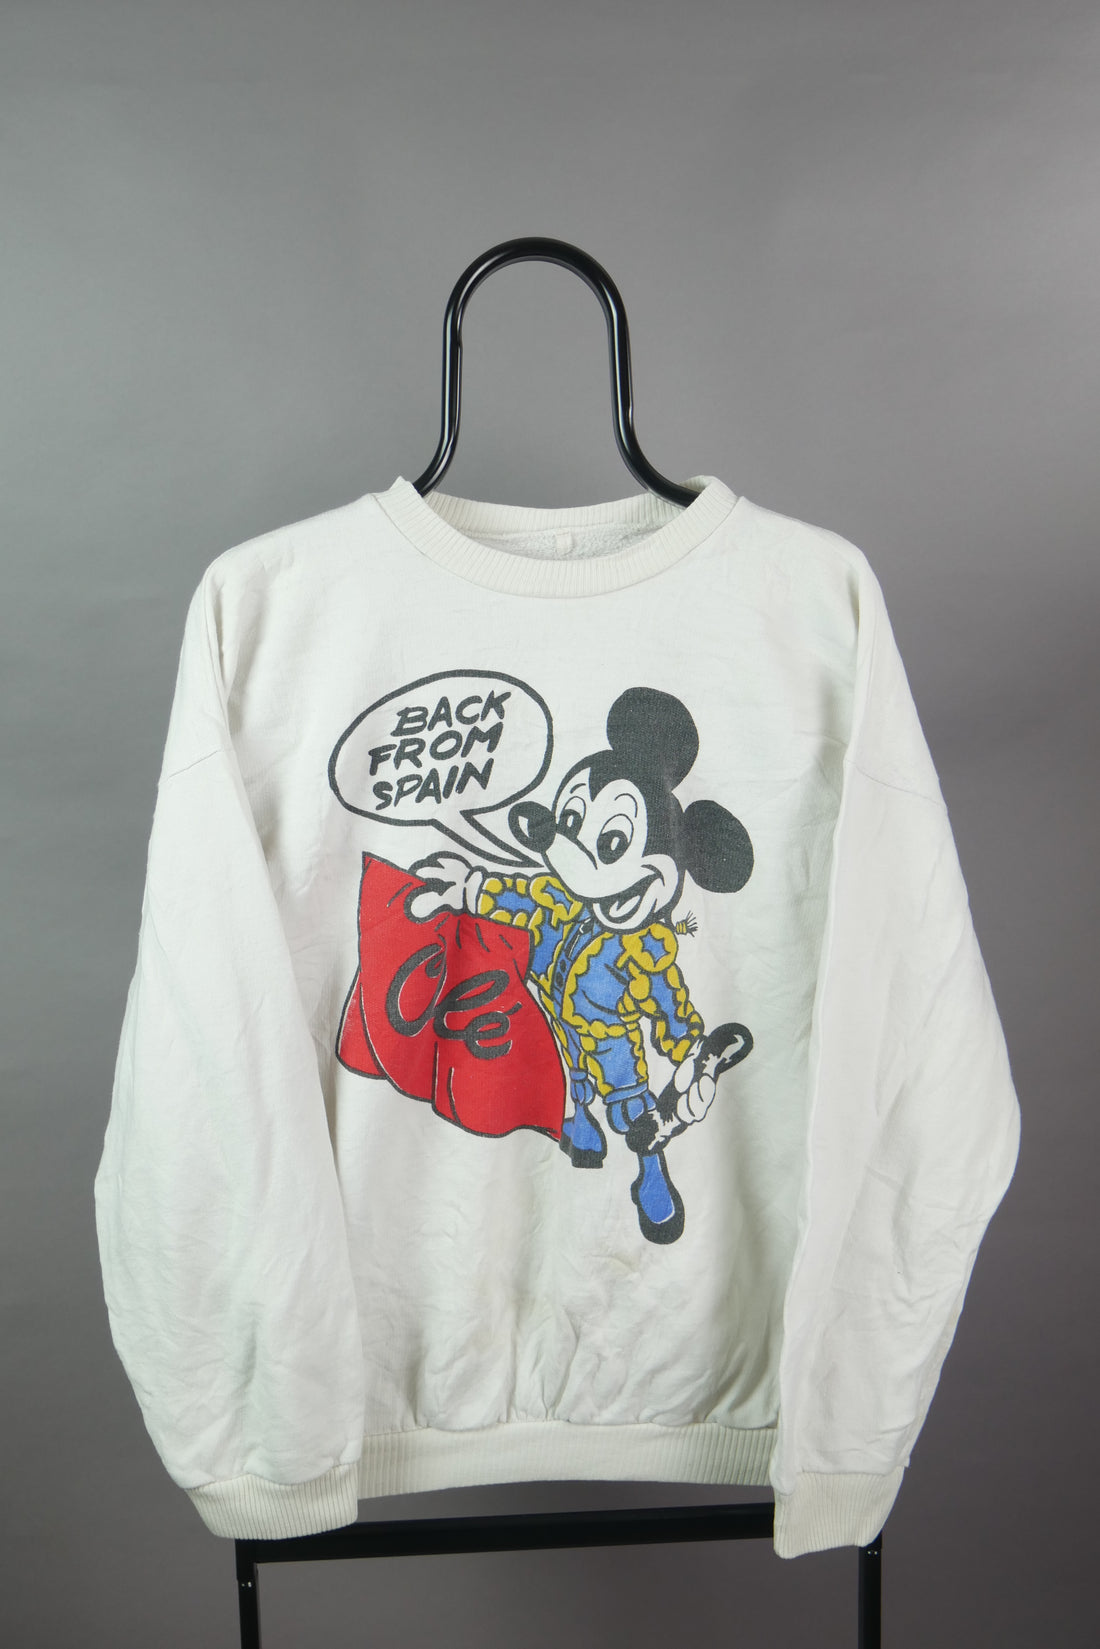 The Vintage Mickey Mouse Graphic Sweatshirt (S)